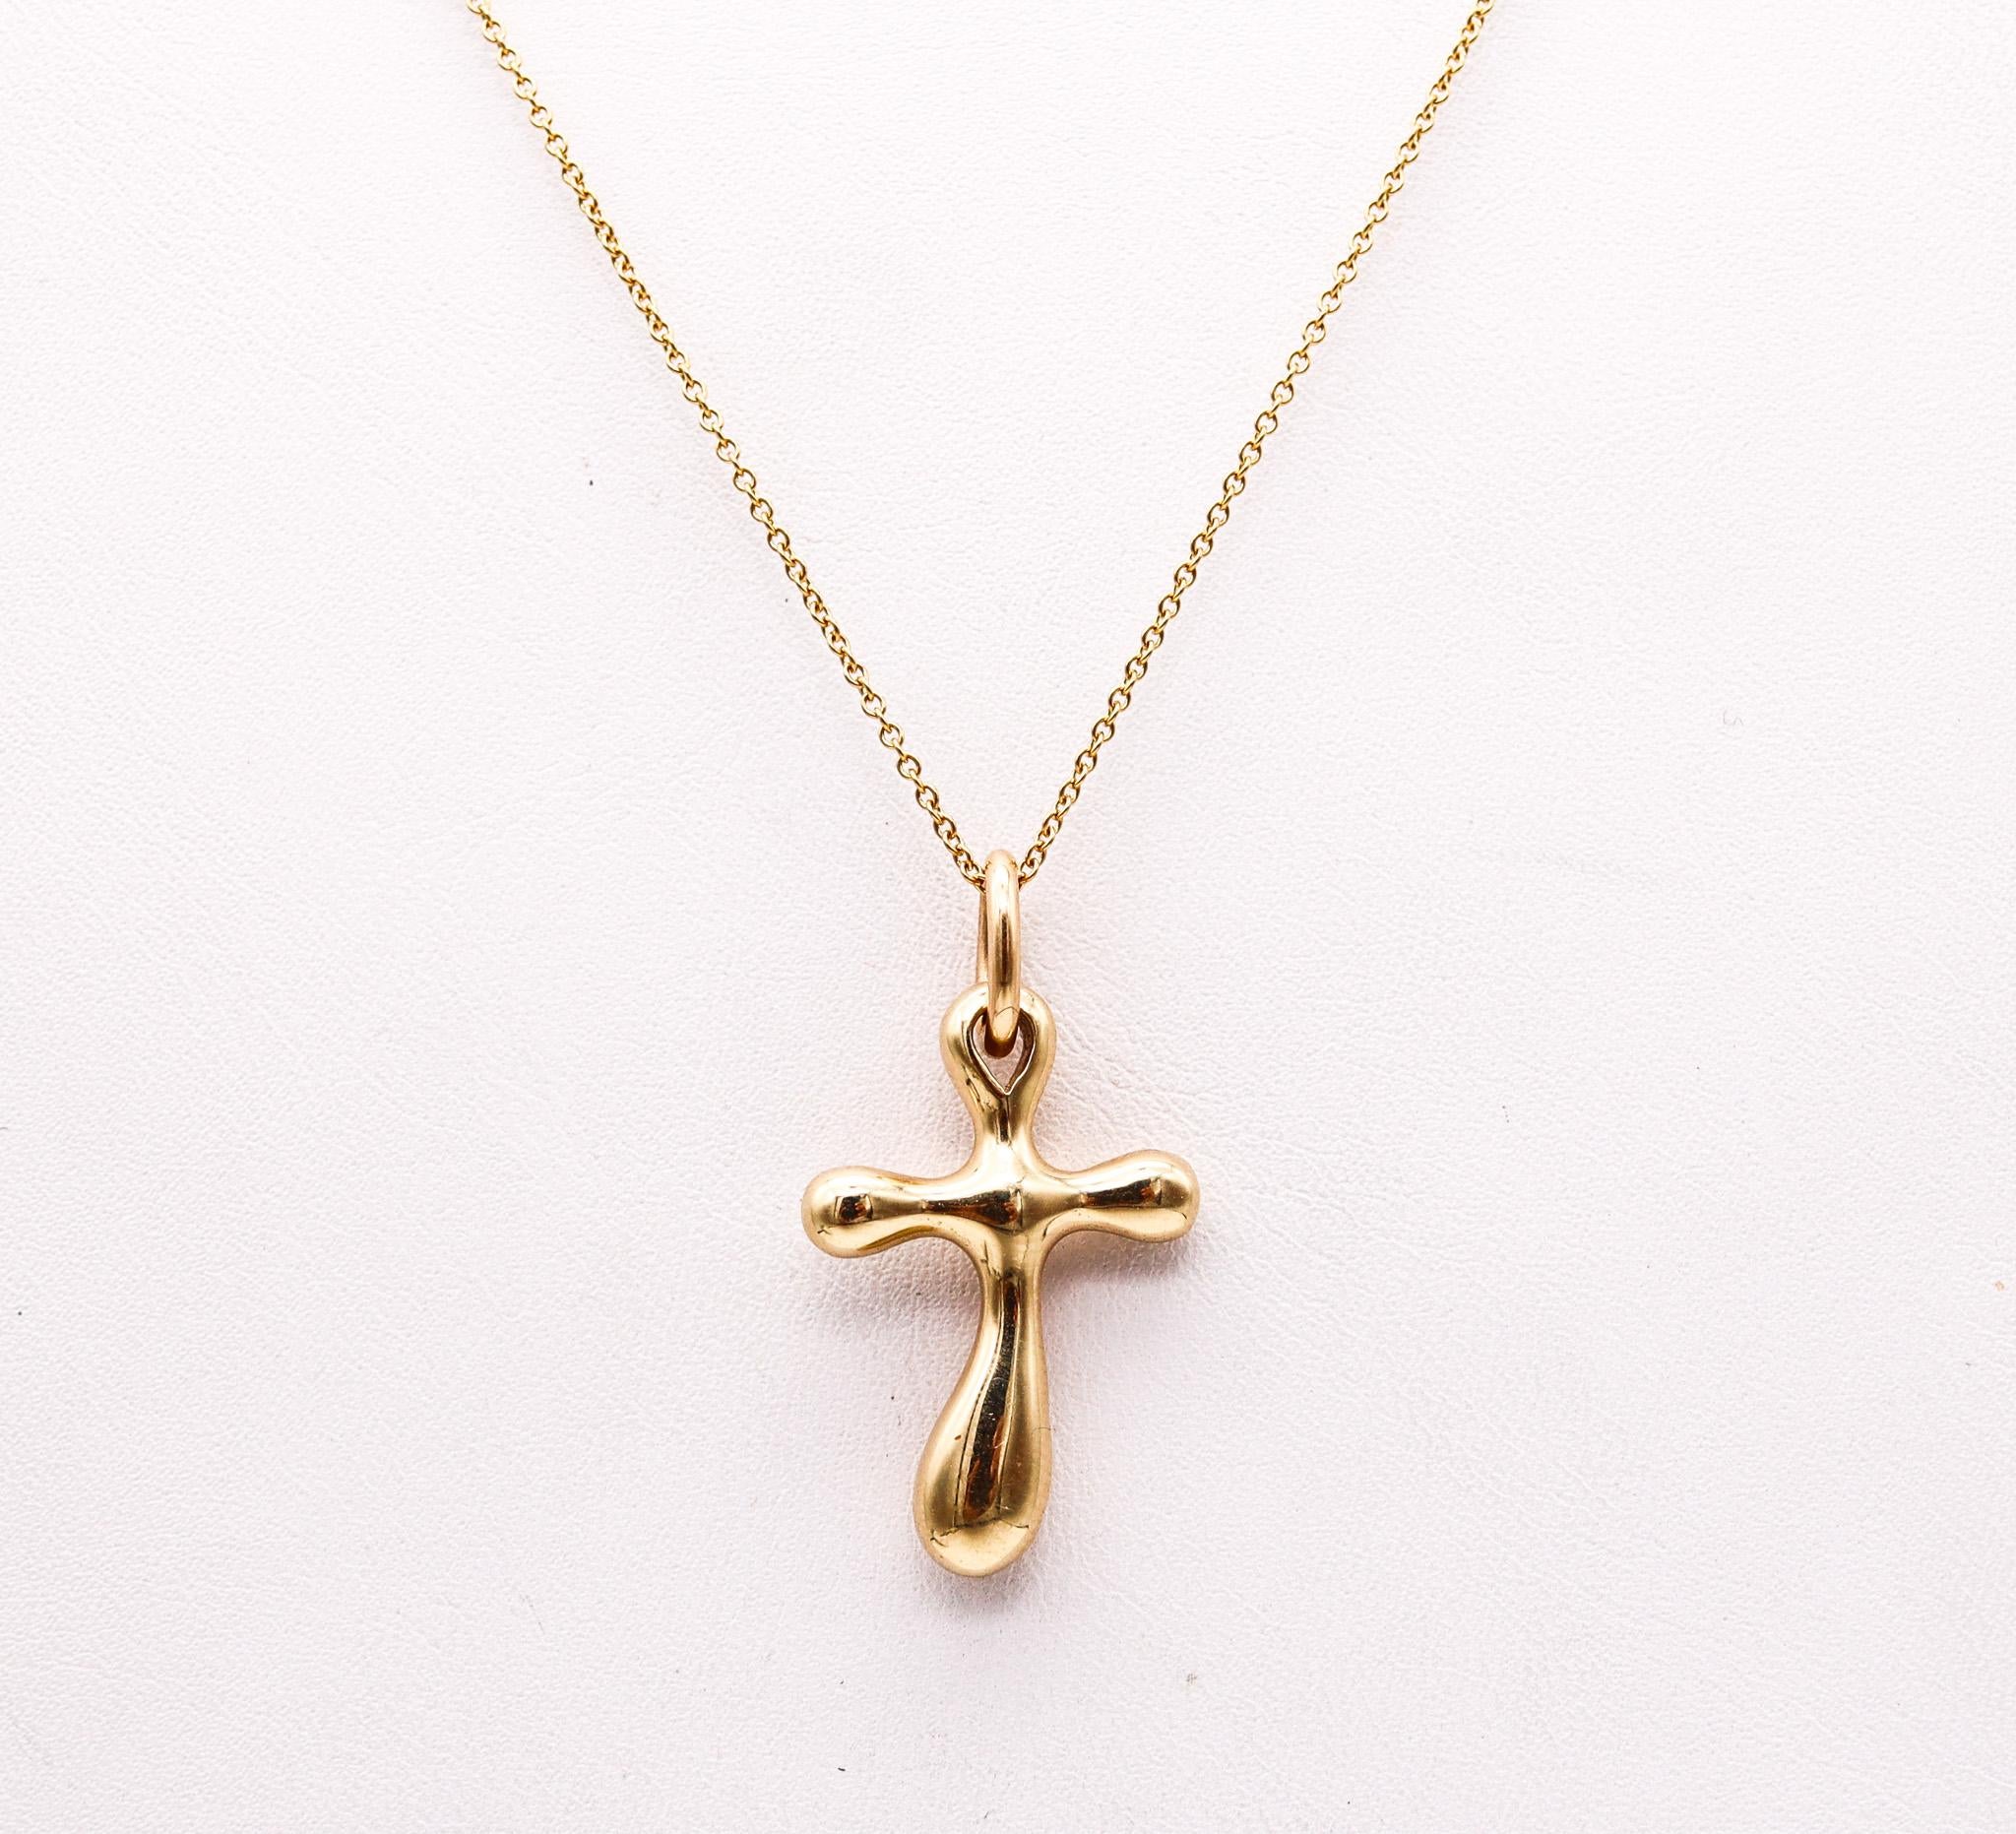 Cross pendant designed by Robert Lee Morris.

Beautiful sculptural cross, created at the studio of Robert Lee Morris. This modernist cross was crafted with free forms sinuous and wavy shapes in solid yellow gold of 14 karats with high polished